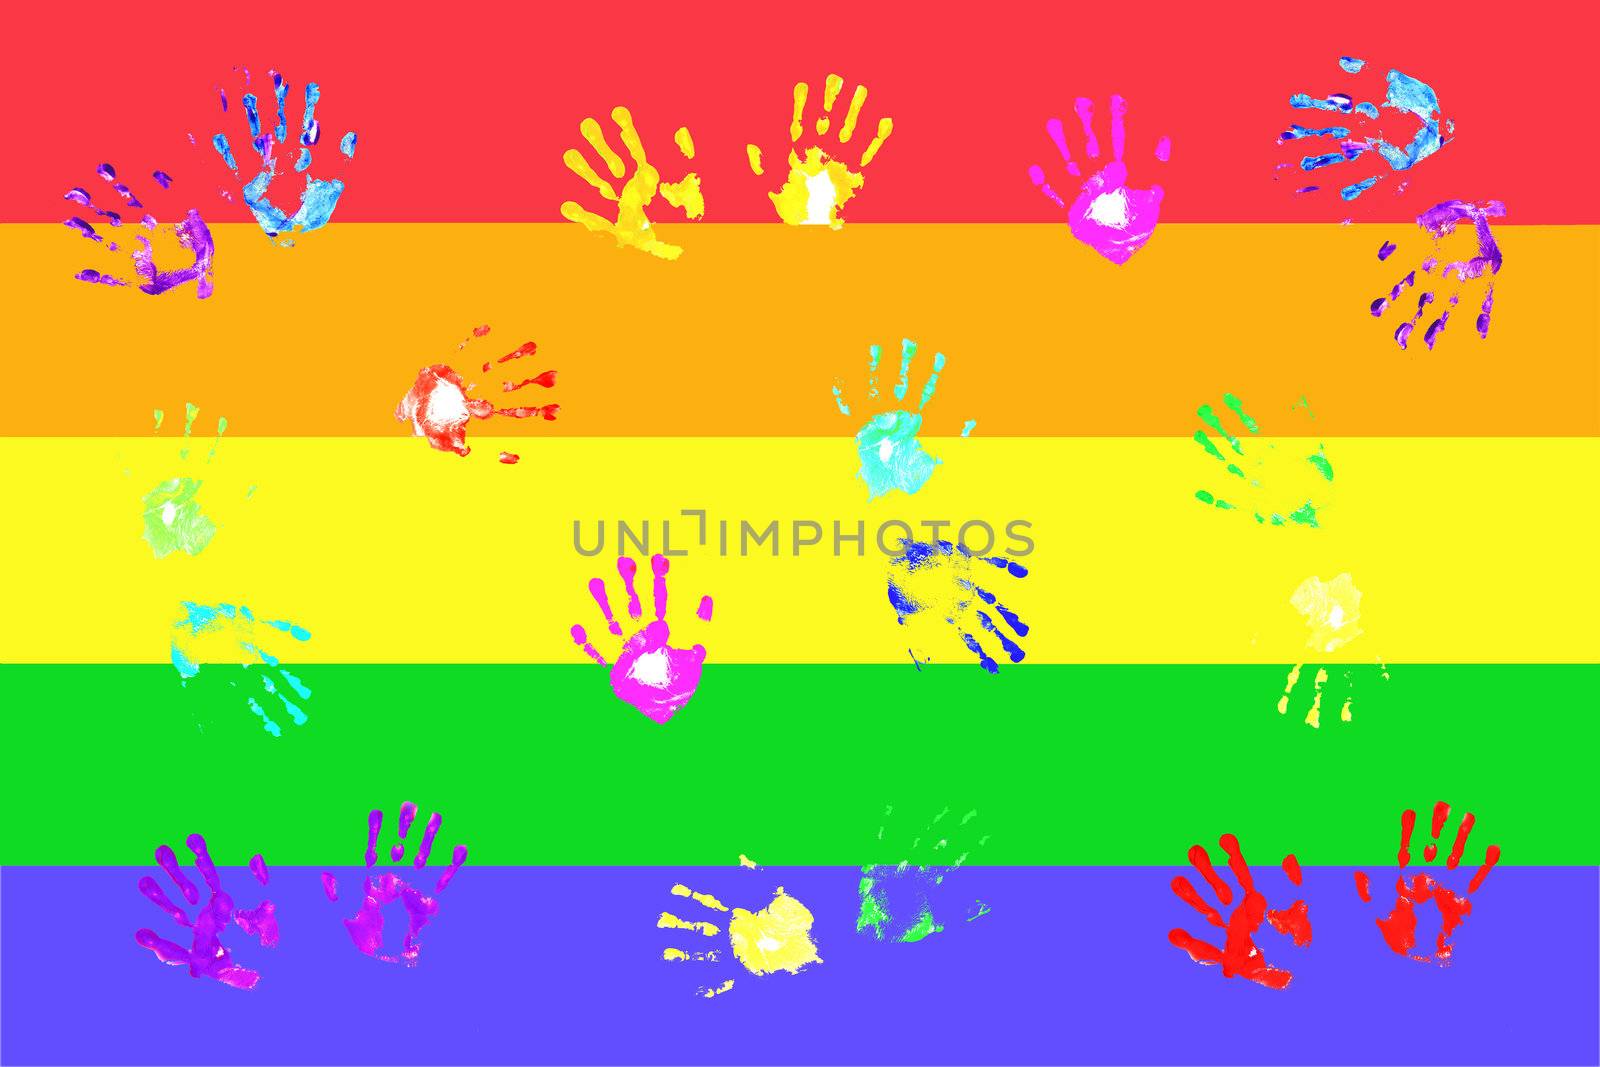 Actual handprints made by children on bold colorful background by jarenwicklund